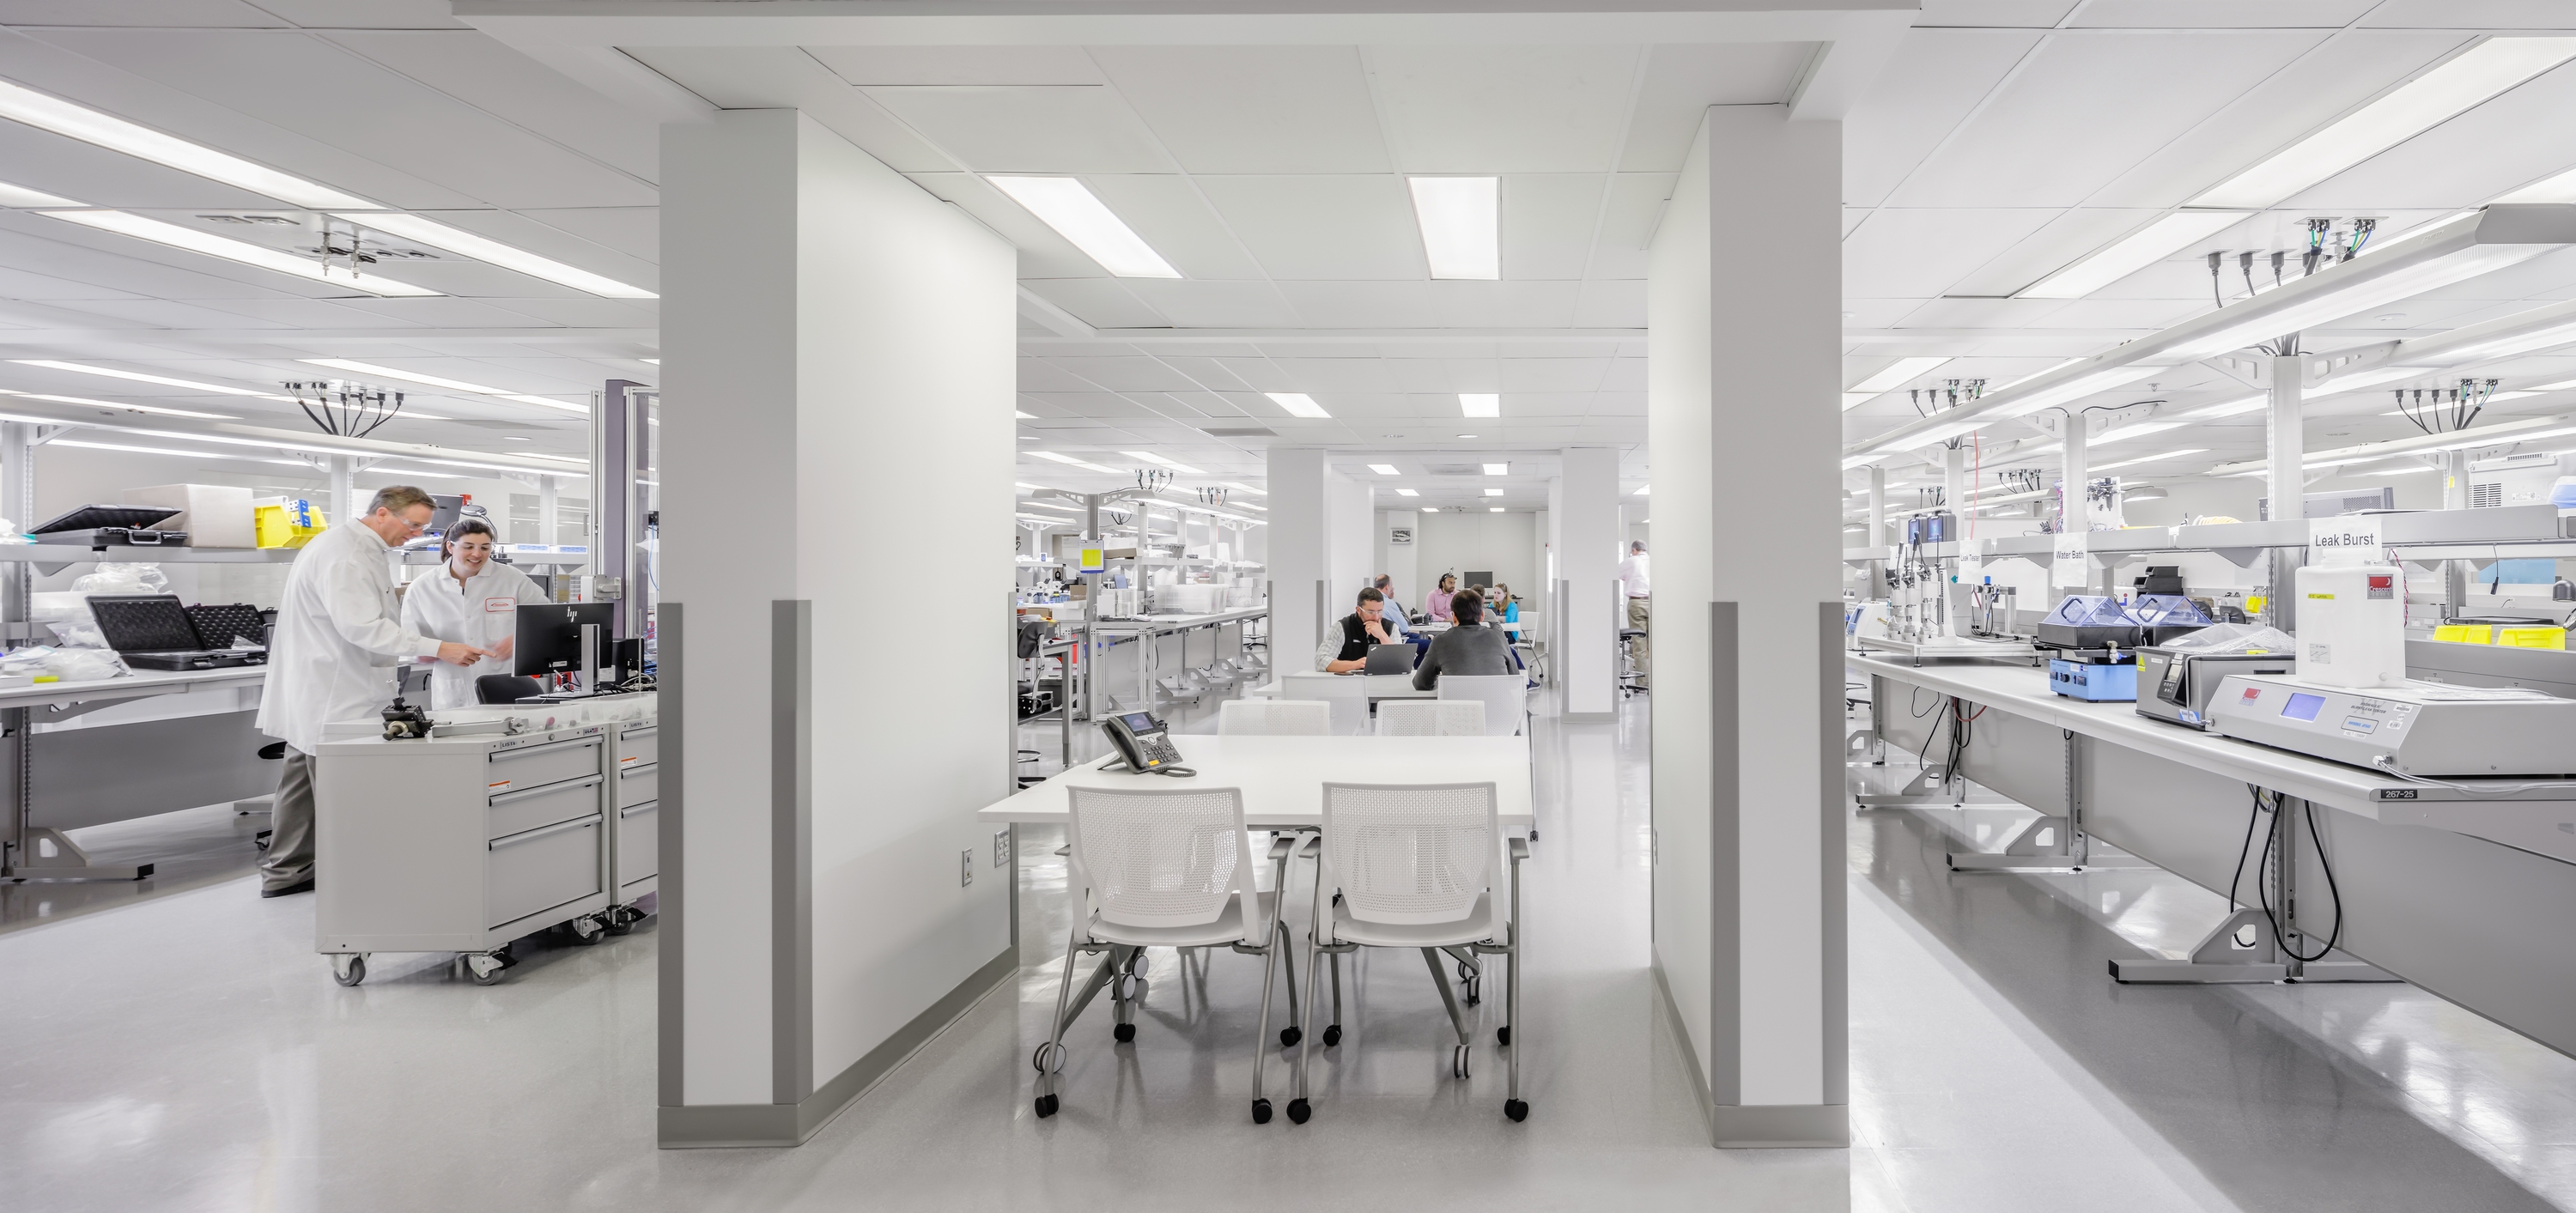 Medical devices and support functions create a Center of Excellence at 125 Spring Street.